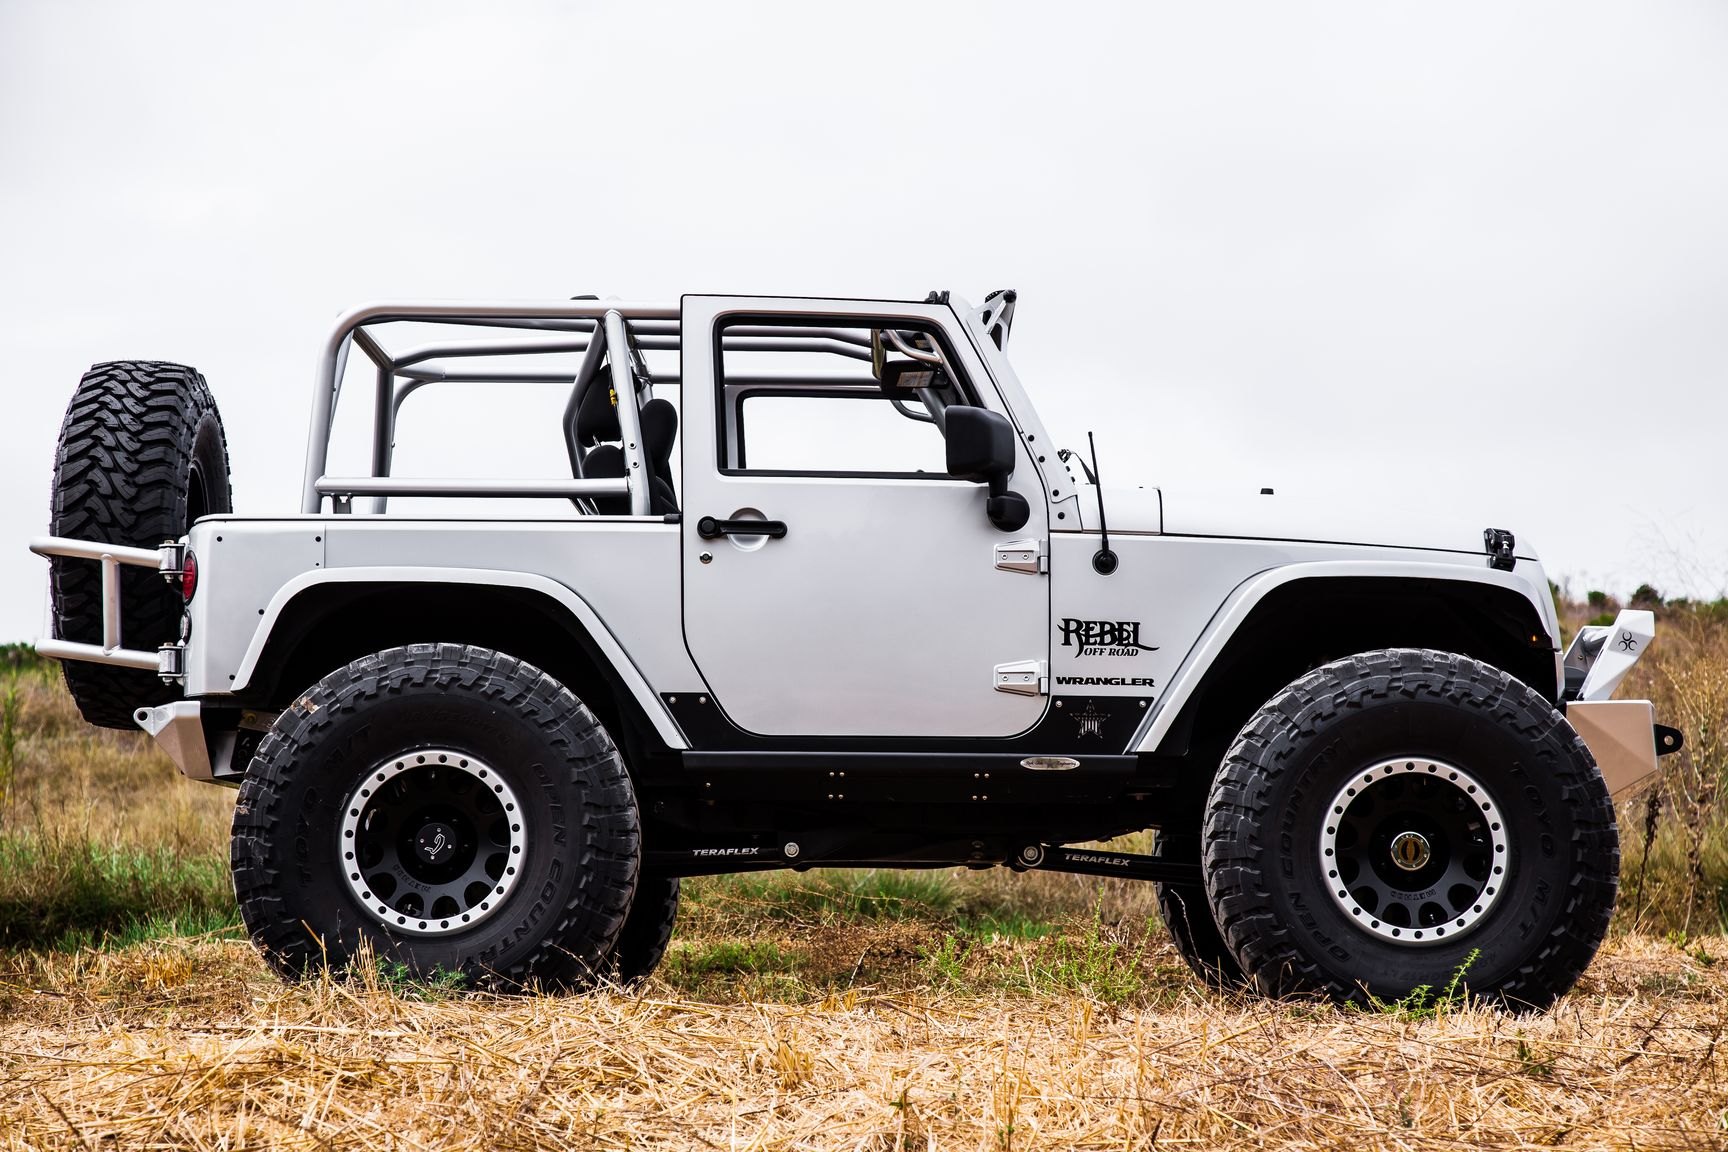 Custom Matte Black Wheels on White Lifted Jeep Wrangler - Photo by Rebel Off-Road